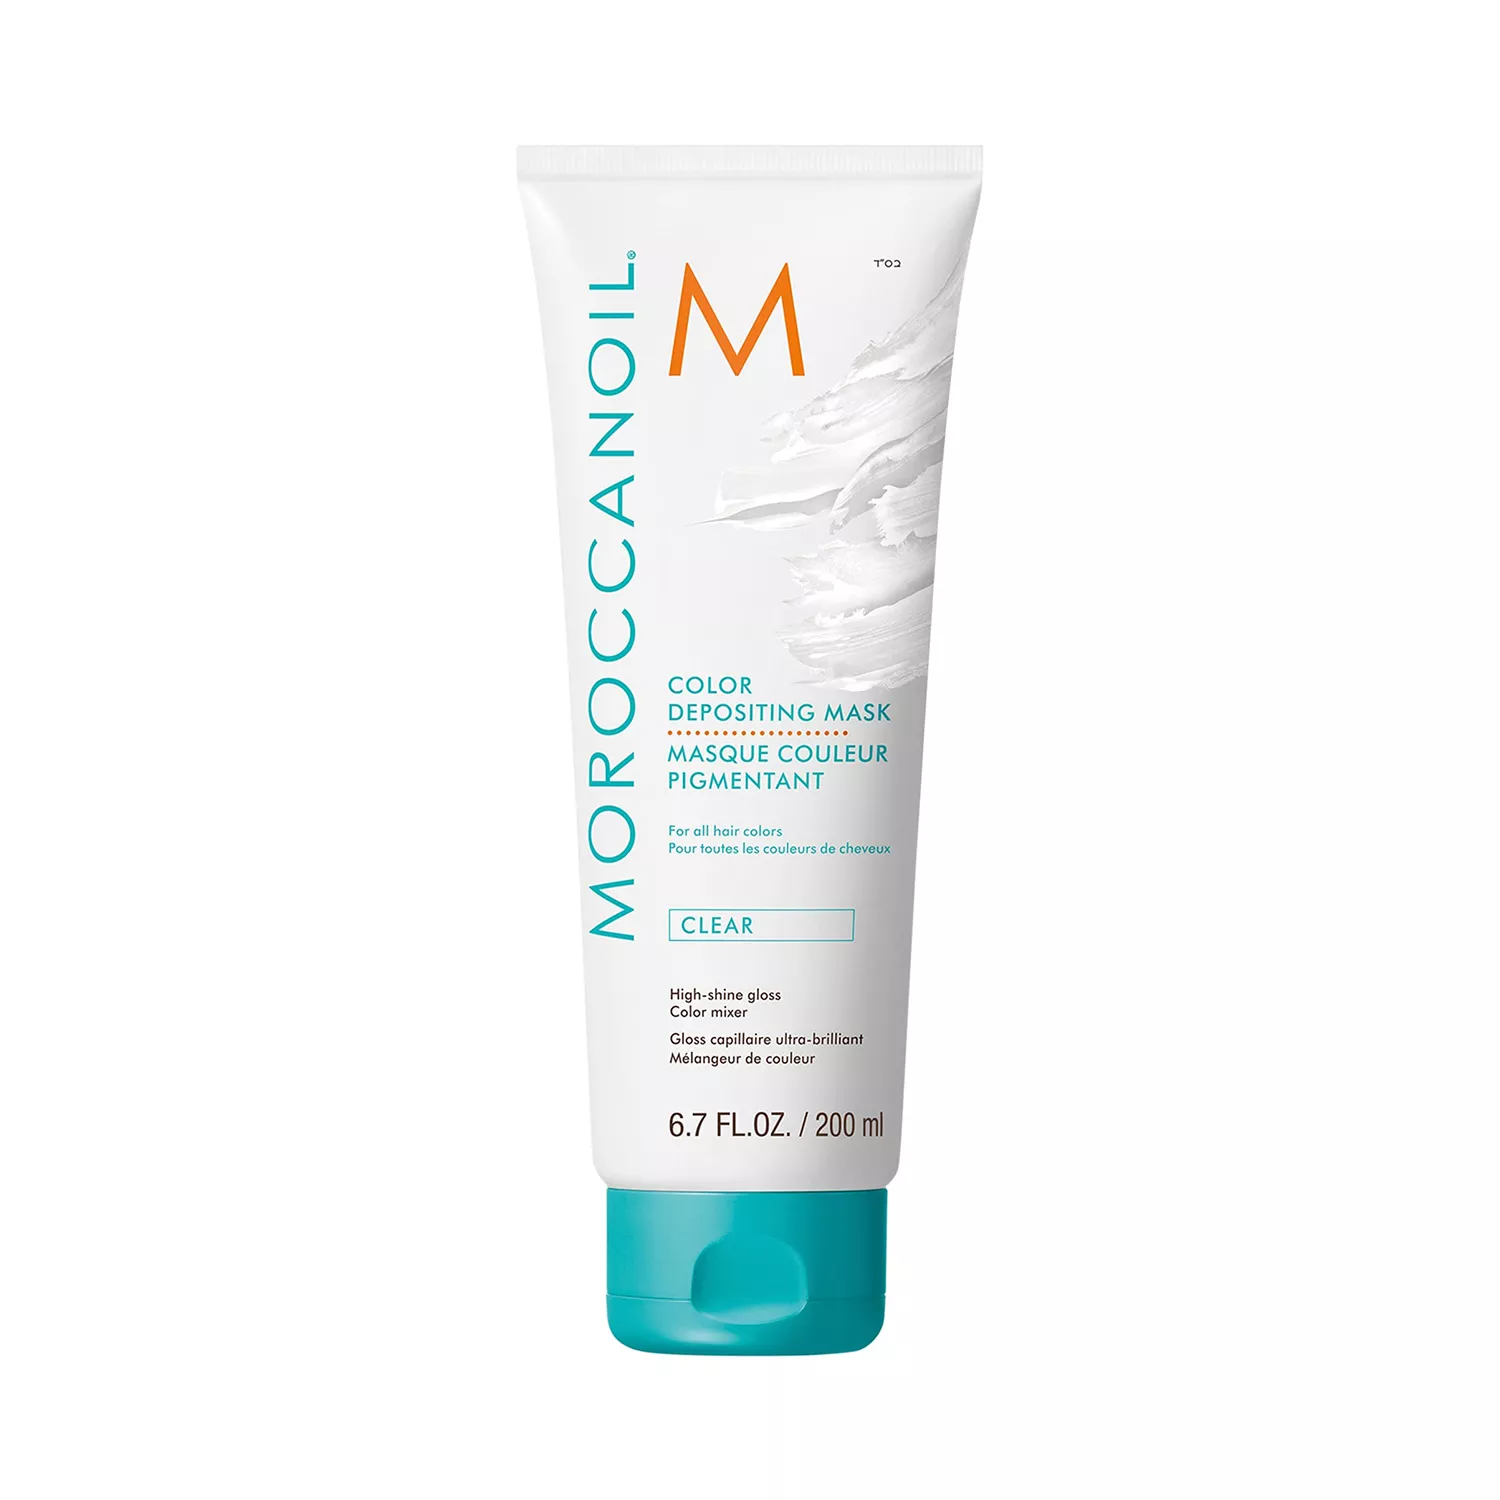 Moroccanoil Color Depositing Mask in clear